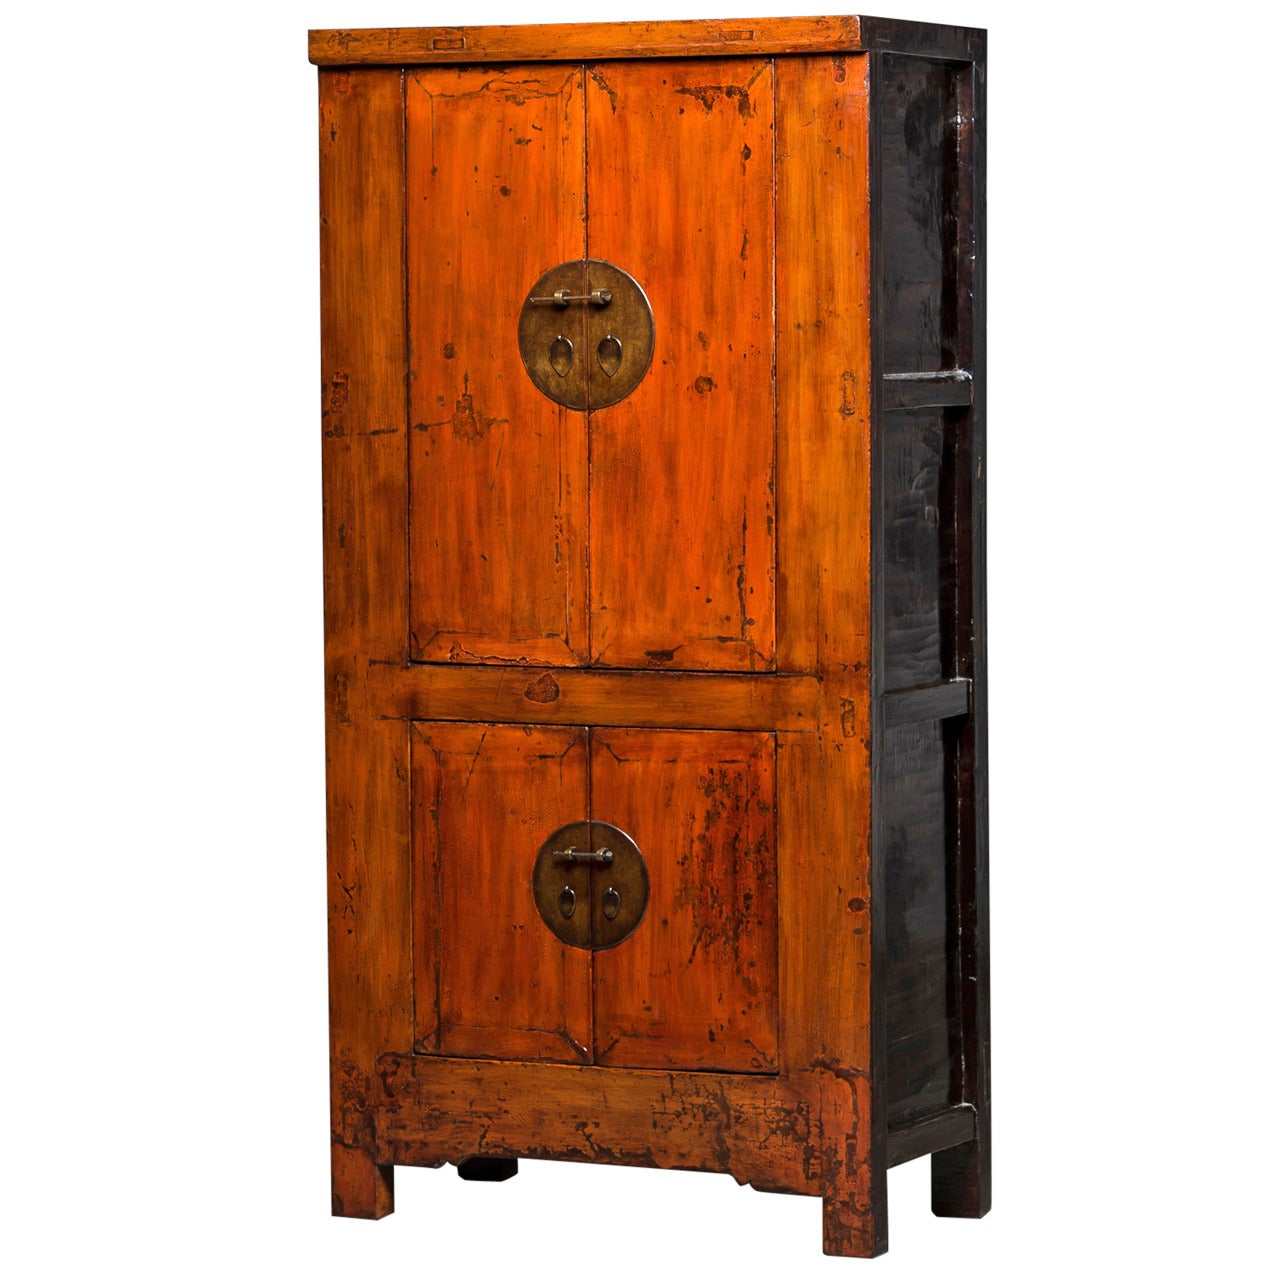 Cabinet with a Beautiful Original "Cognac" Lacquer Colour, Early 19th Century